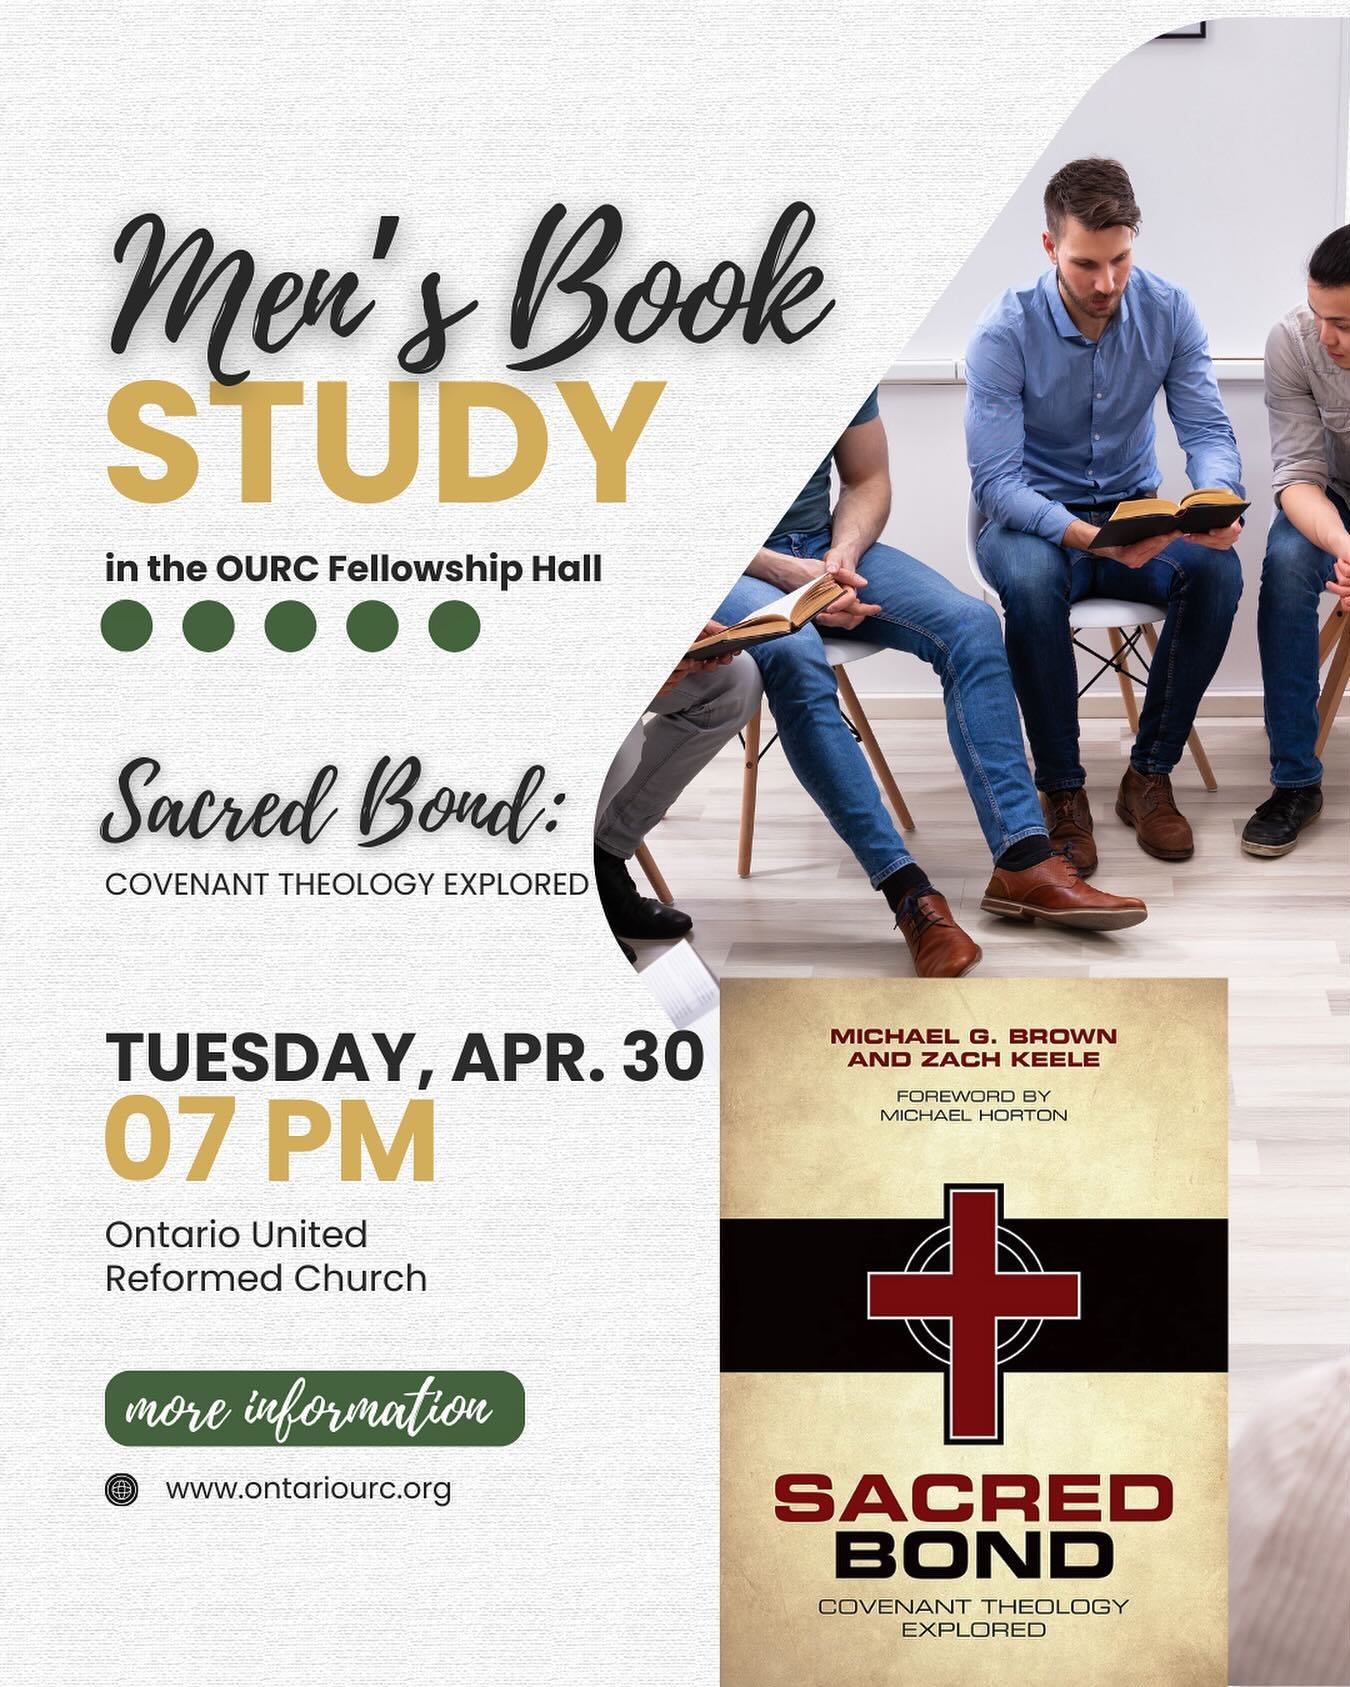 Come spend an edifying evening of fellowship and discussion with the OURC gents!  We&rsquo;ll be reading Chapter 6 of &lsquo;Sacred Bond&rsquo; in the Fellowship Hall&mdash;see you there!